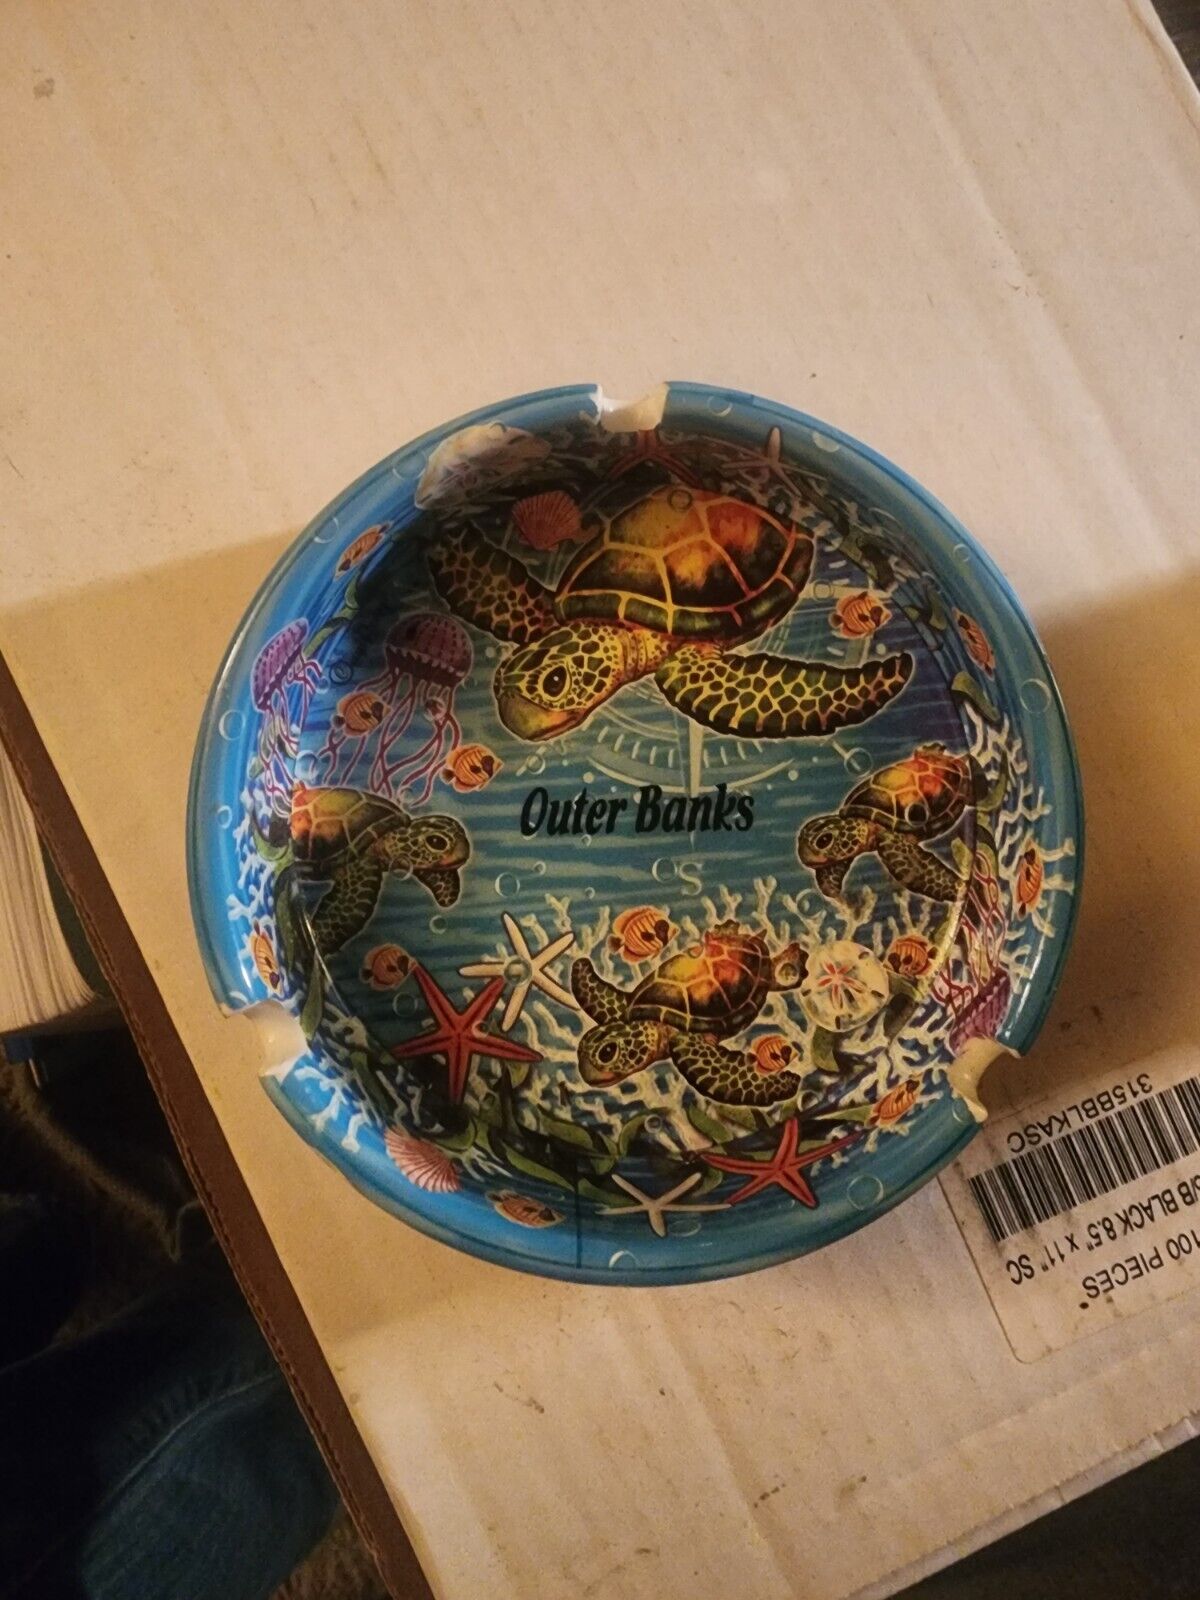 Ashtray from the Outer Banks